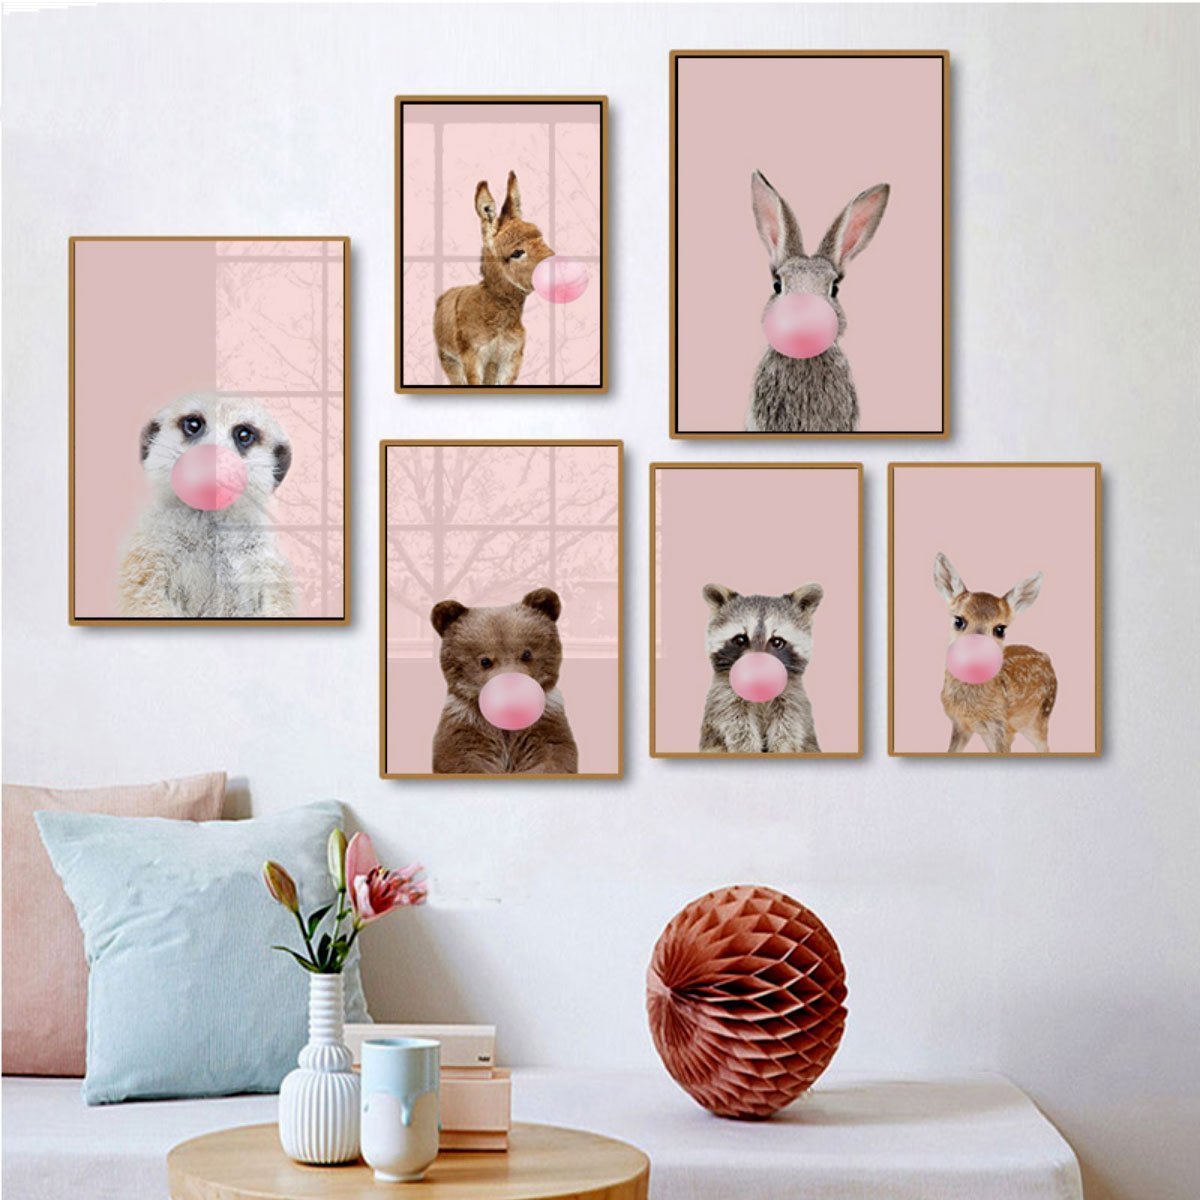 Animals In Pink Room - Nordic Side - 